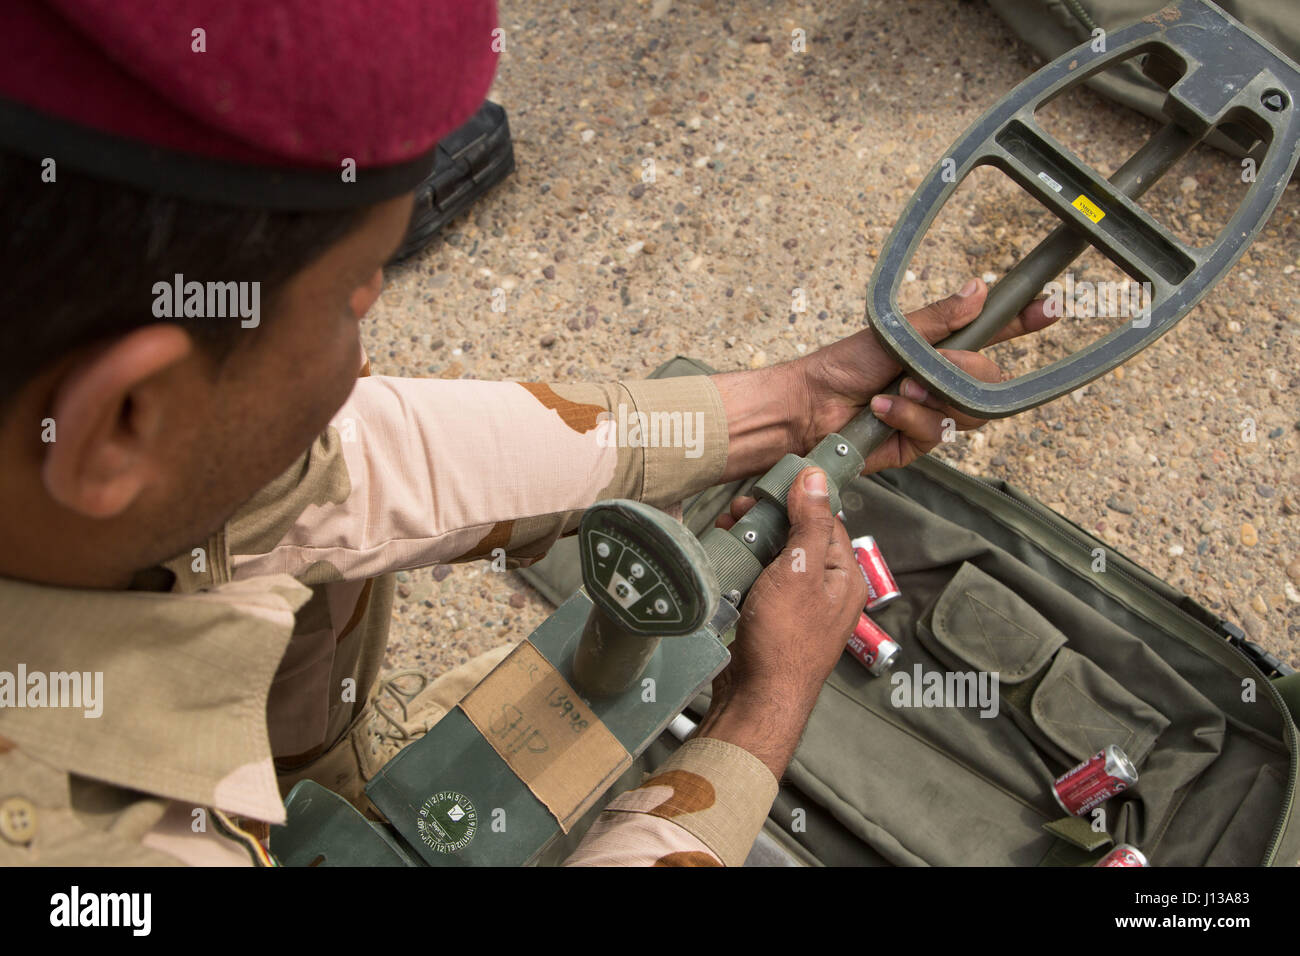 An Iraqi security forces soldier assembles a mine detector during counter improvised explosive device training provided by British army trainers deployed in support of Combined Joint Task Force – Operation Inherent Resolve at Camp Taji, Iraq, April 12, 2017. This training is part of the overall Combined Joint Task Force – Operation Inherent Resolve building partner capacity mission by training and improving the capability of partnered forces fighting ISIS. CJTF-OIR is the global Coalition to defeat ISIS in Iraq and Syria.  (U.S. Army photo by Spc. Christopher Brecht) Stock Photo